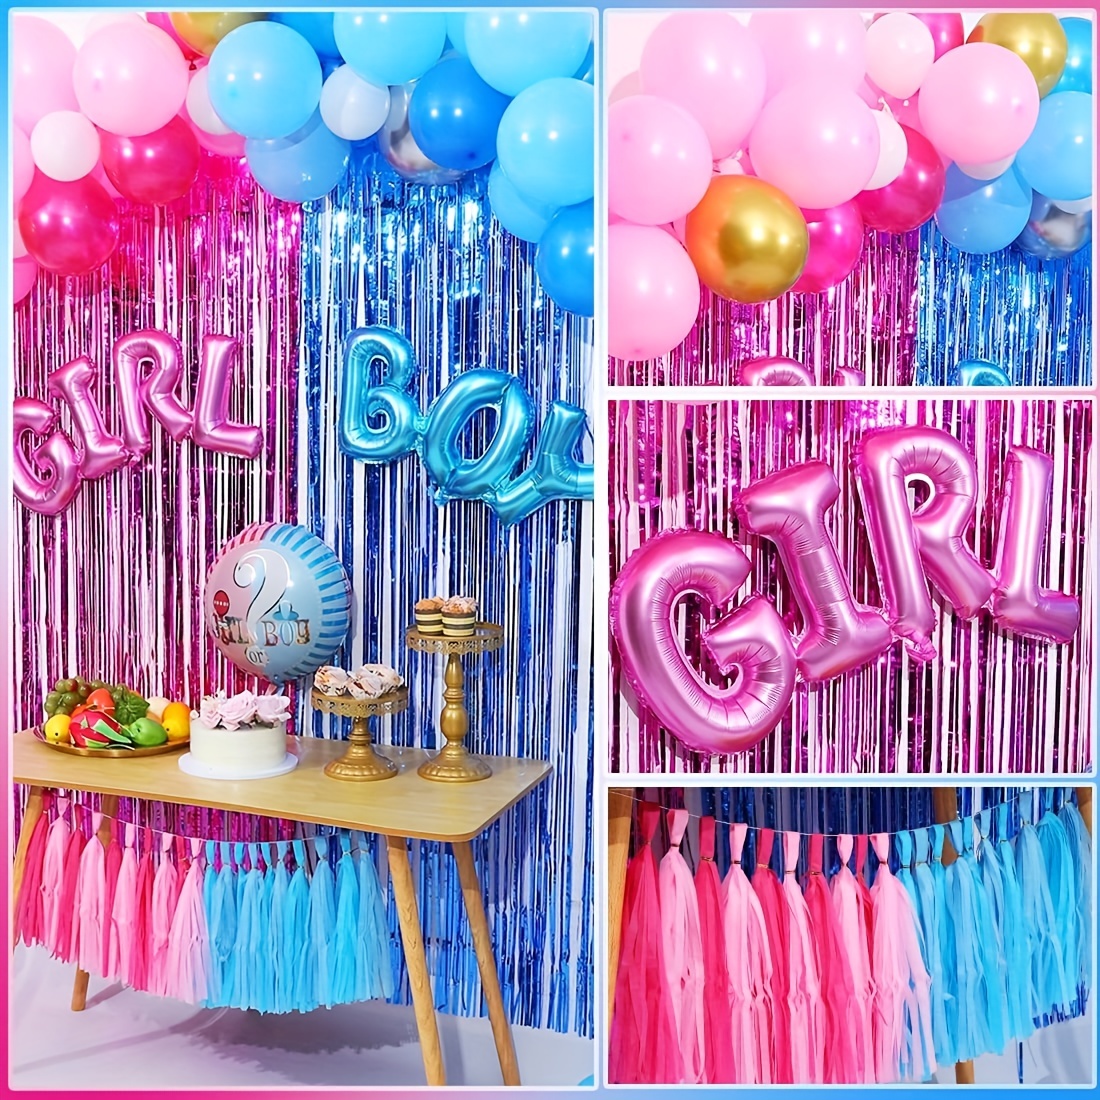  Boy Or Girl Gender Reveal Party Decoration Set,&Balloons Arch  Garland Kit,Foil Balloons,Curtains,Paper tassel Garland,Balloon decoration  tools,For Party Photo Backdrop (Pink/Blue) Shower Birthday : Toys & Games